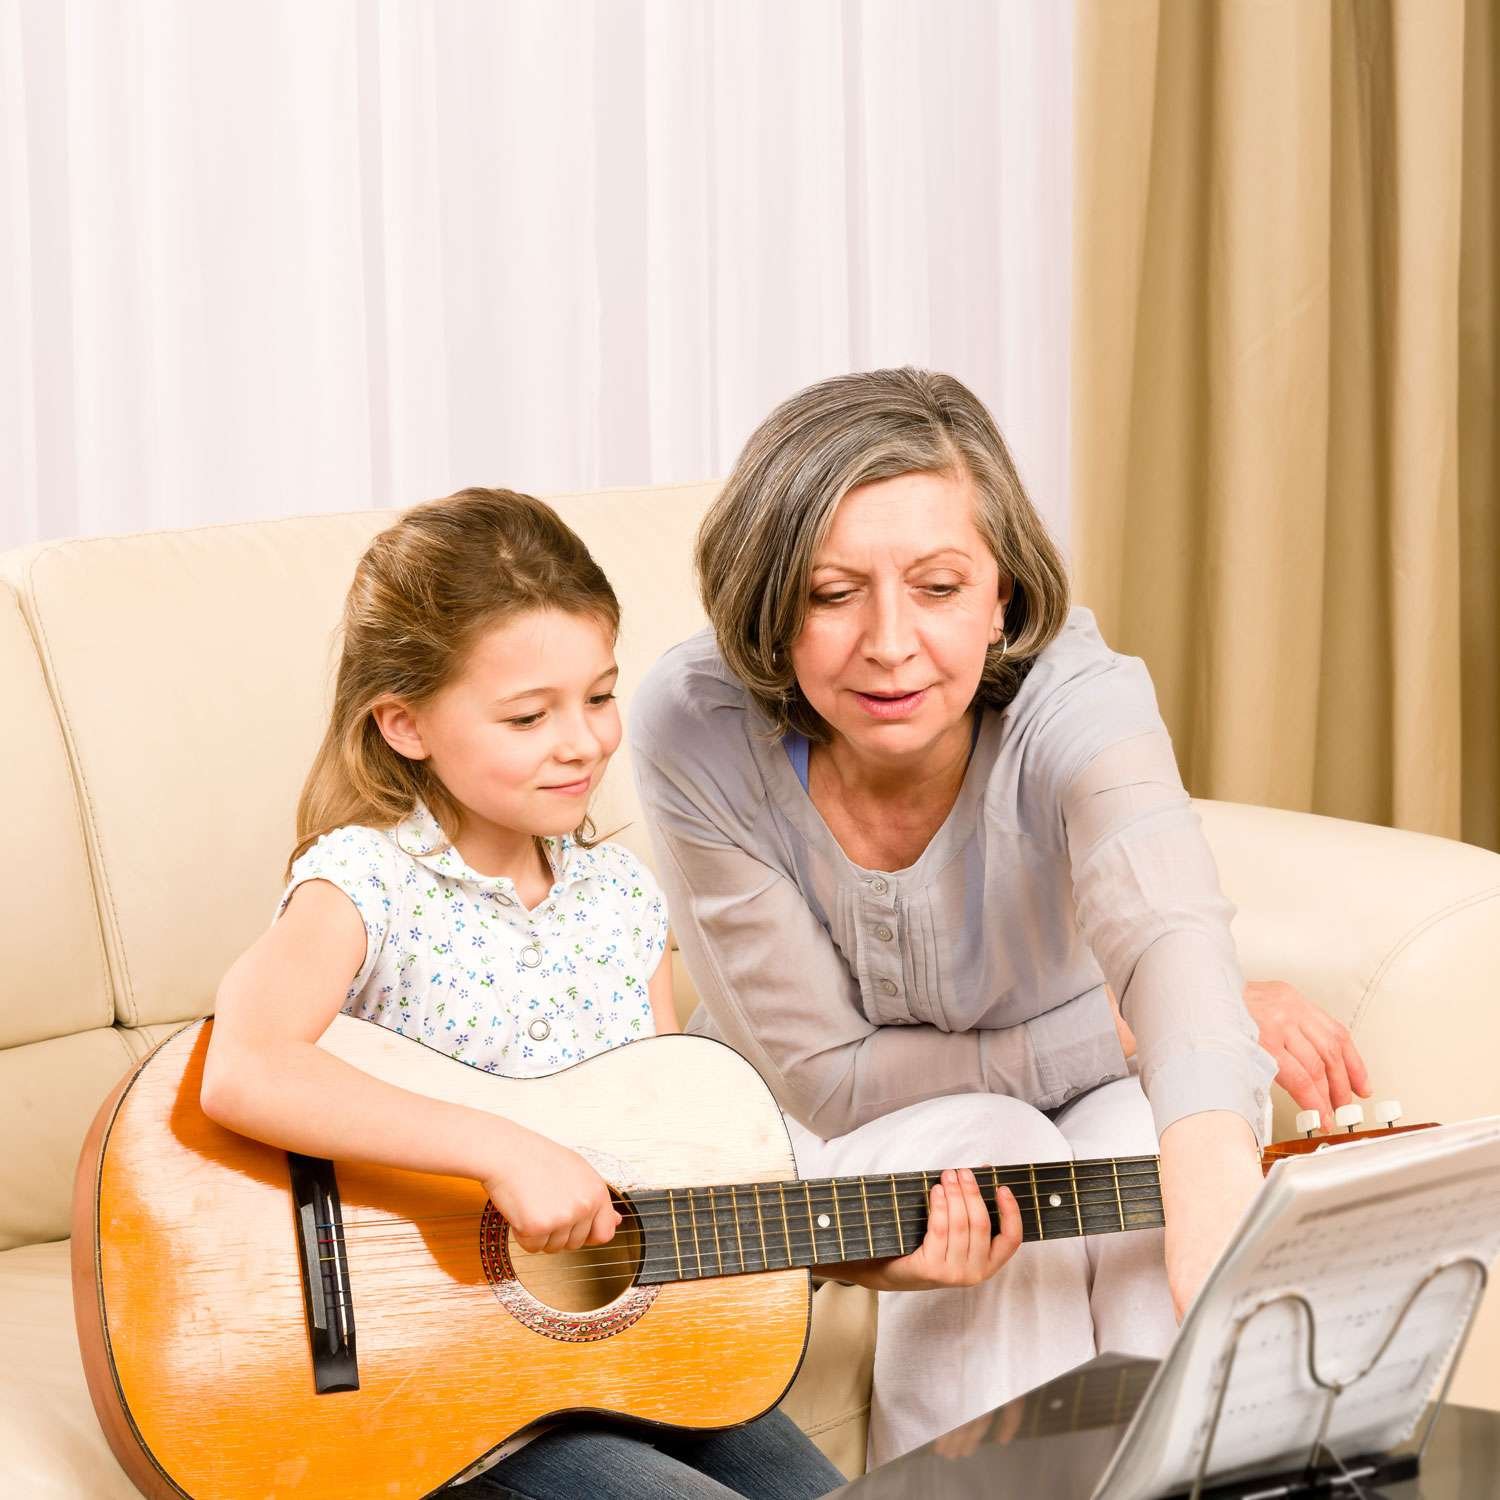 guitar instructor teaching her young female student